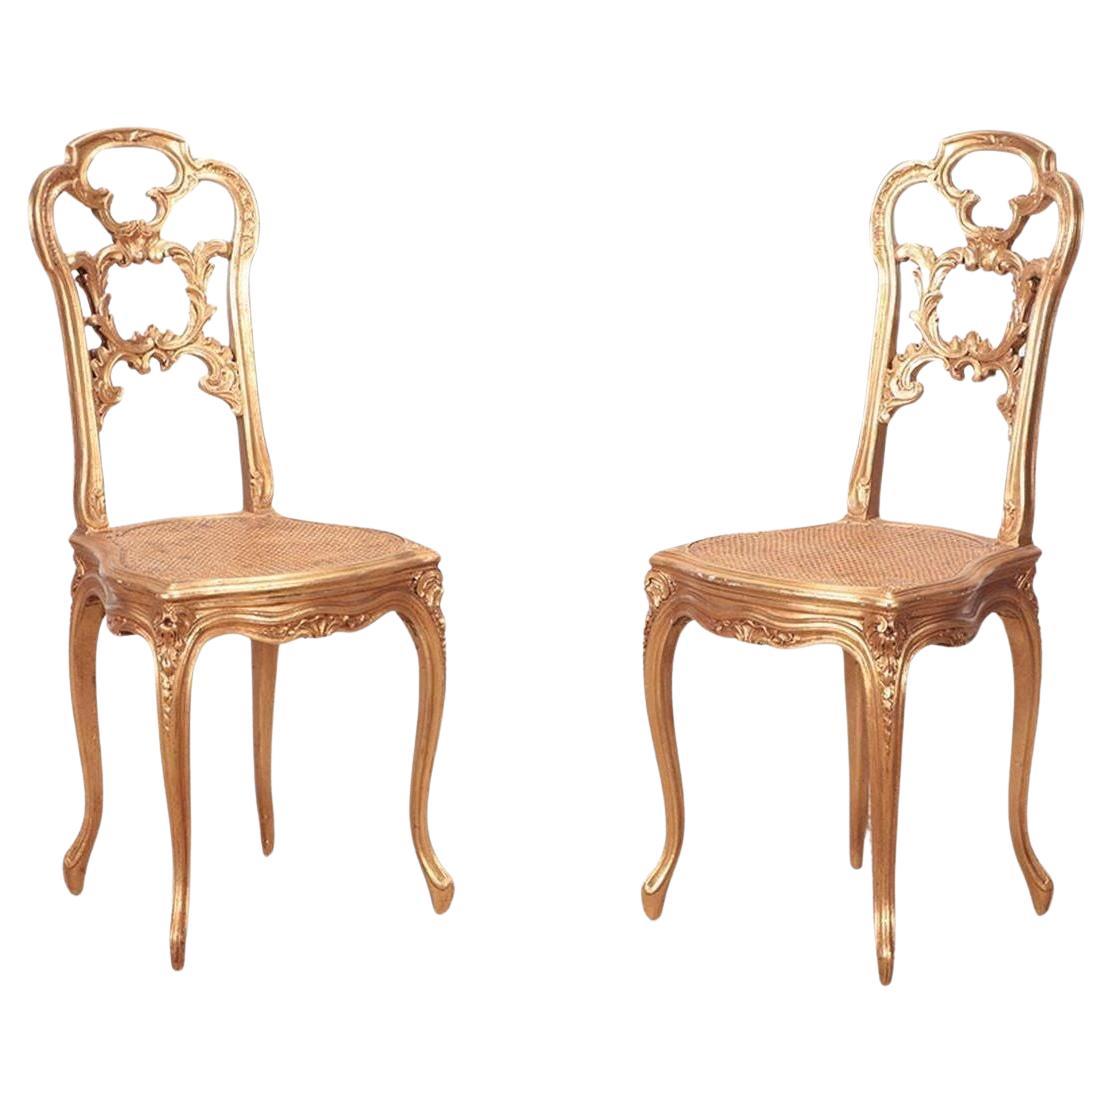 French Pair of Carved Giltwood Side Chairs, c. 1910's For Sale